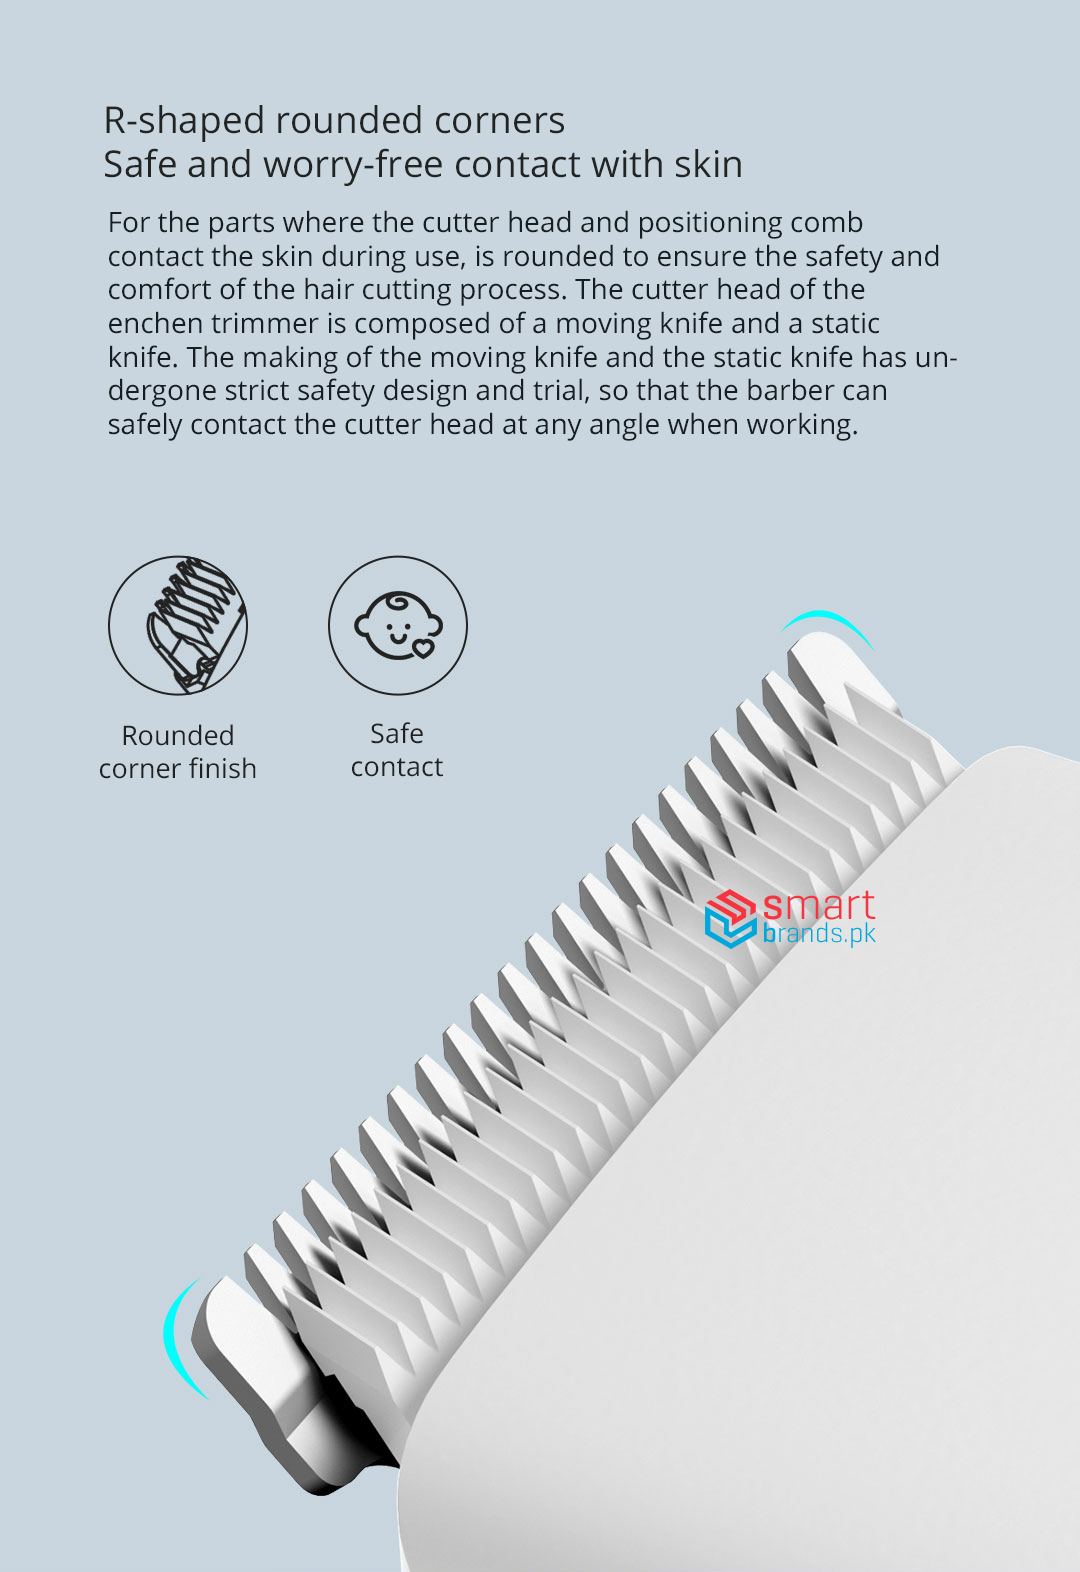 For the parts where the cutter head and positioning comb contact the skin during use, is rounded to ensure the safety and comfort of the hair cutting process. The cutter head of the enchen trimmer is composed of a moving knife and a static knife. The making of the moving knife and the static knife has undergone strict safety design and trial, so that the barber can safely contact the cutter head at any angle when working.